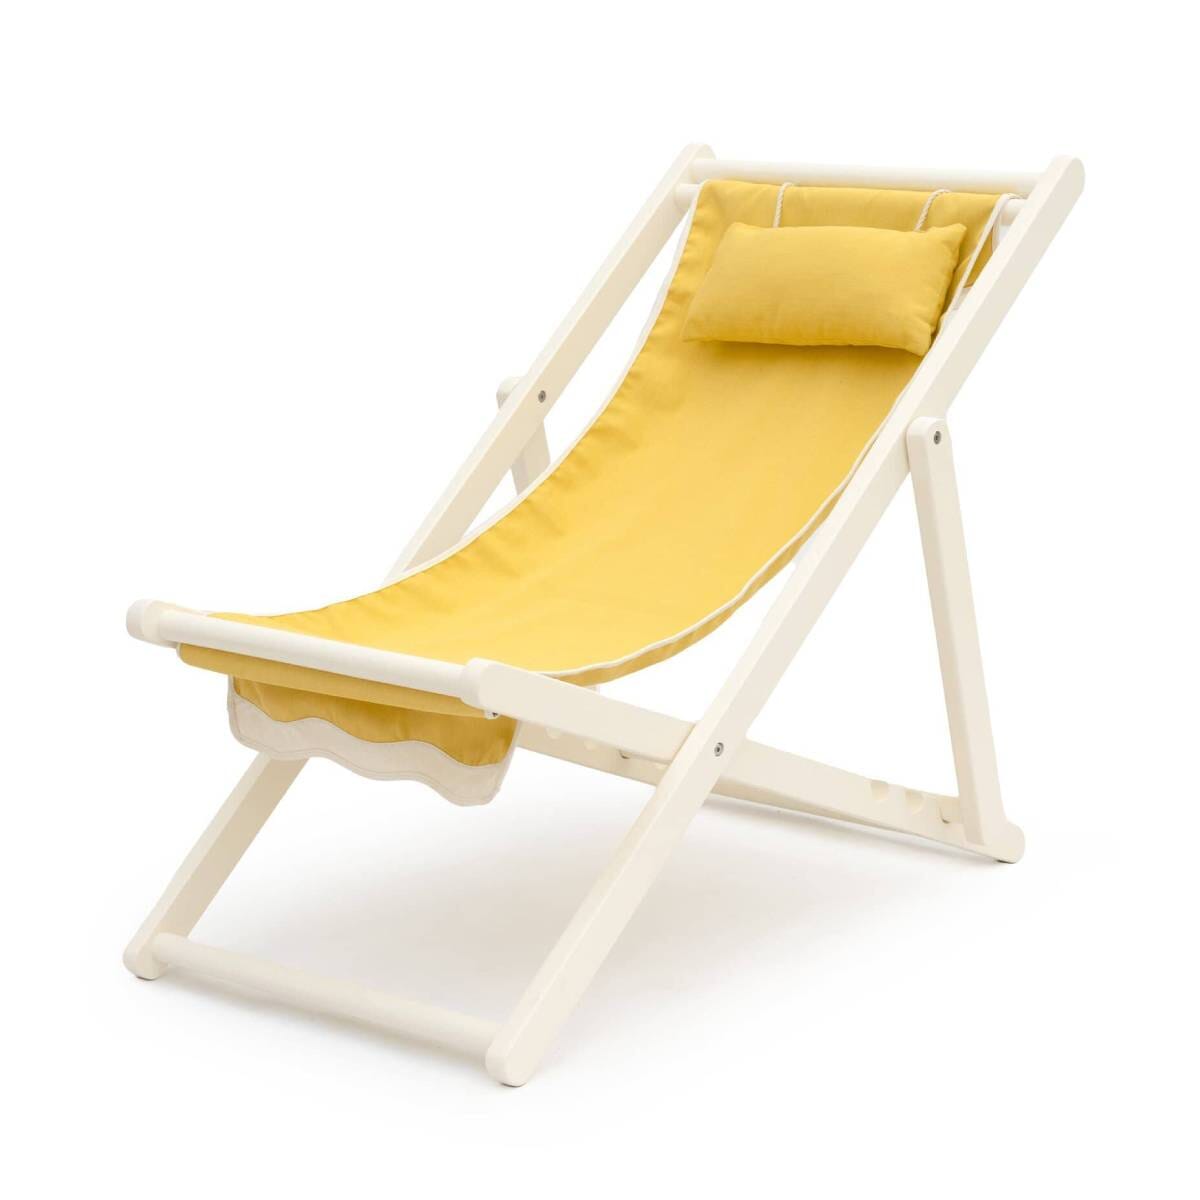 The Sling Chair - Rivie Mimosa Sling Chair Business & Pleasure Co Aus 